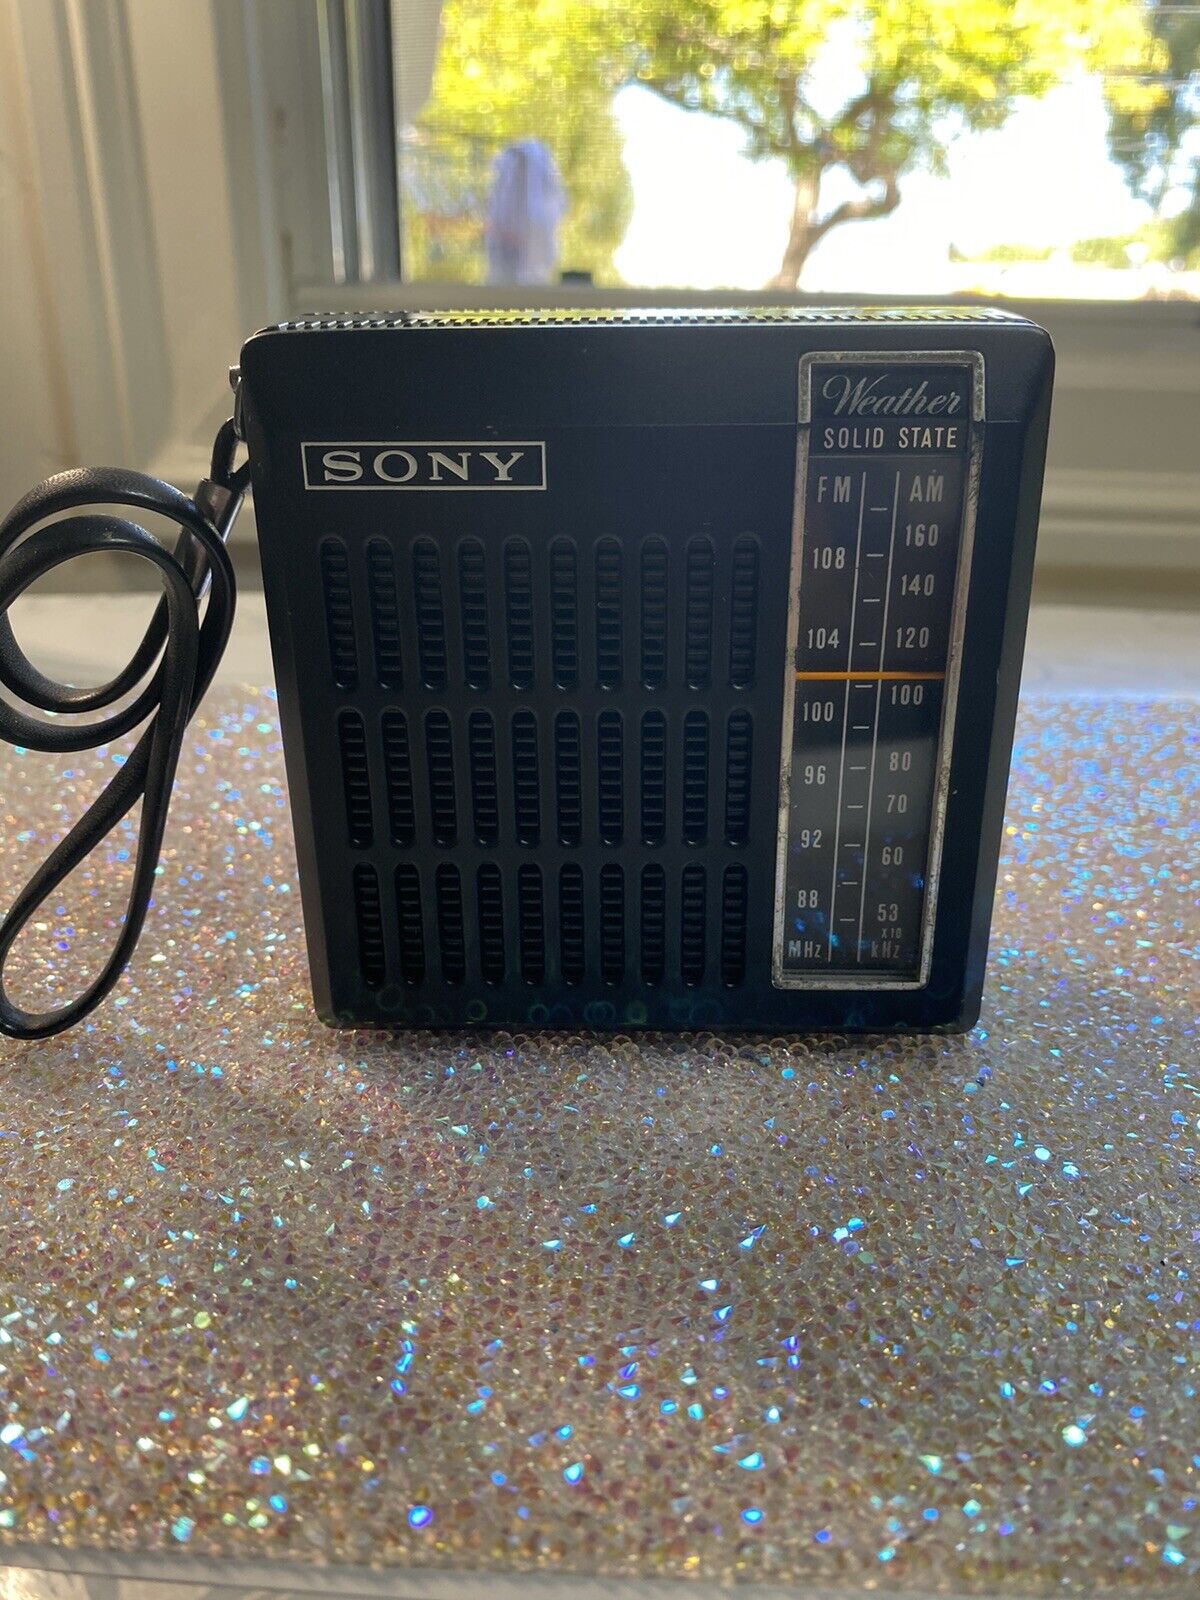 Sony Model TFM  3900W VTG SONY AM/FM Weather Solid State